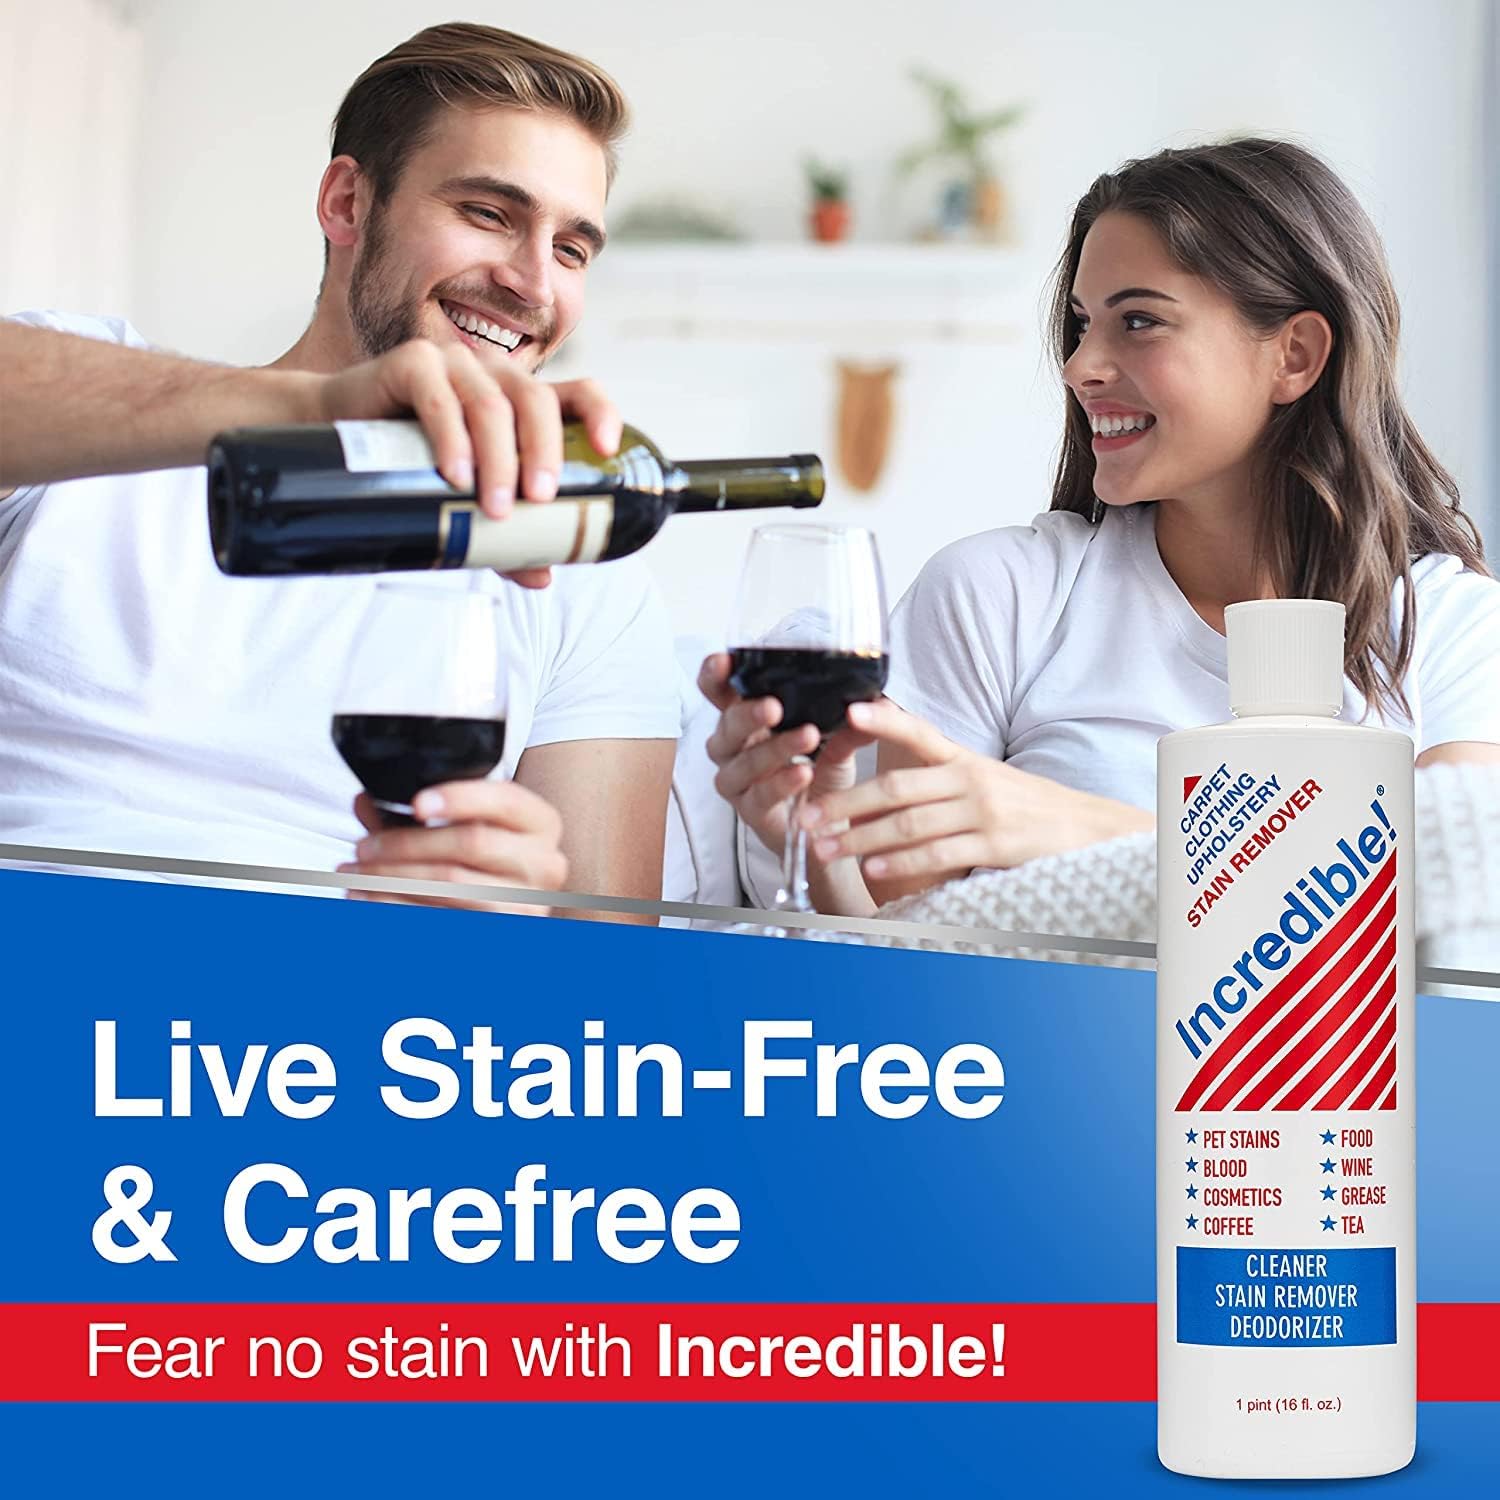 Incredible! Stain Remover - Stain Remover for Clothes, Laundry, Carpets, Mattress & Upholstery, Removes Most Household Stains - Pet Stains, Urine, Odors, Red Wine, Grease, Ink & Coffee! 16.oz (2 Pack) : Health & Household